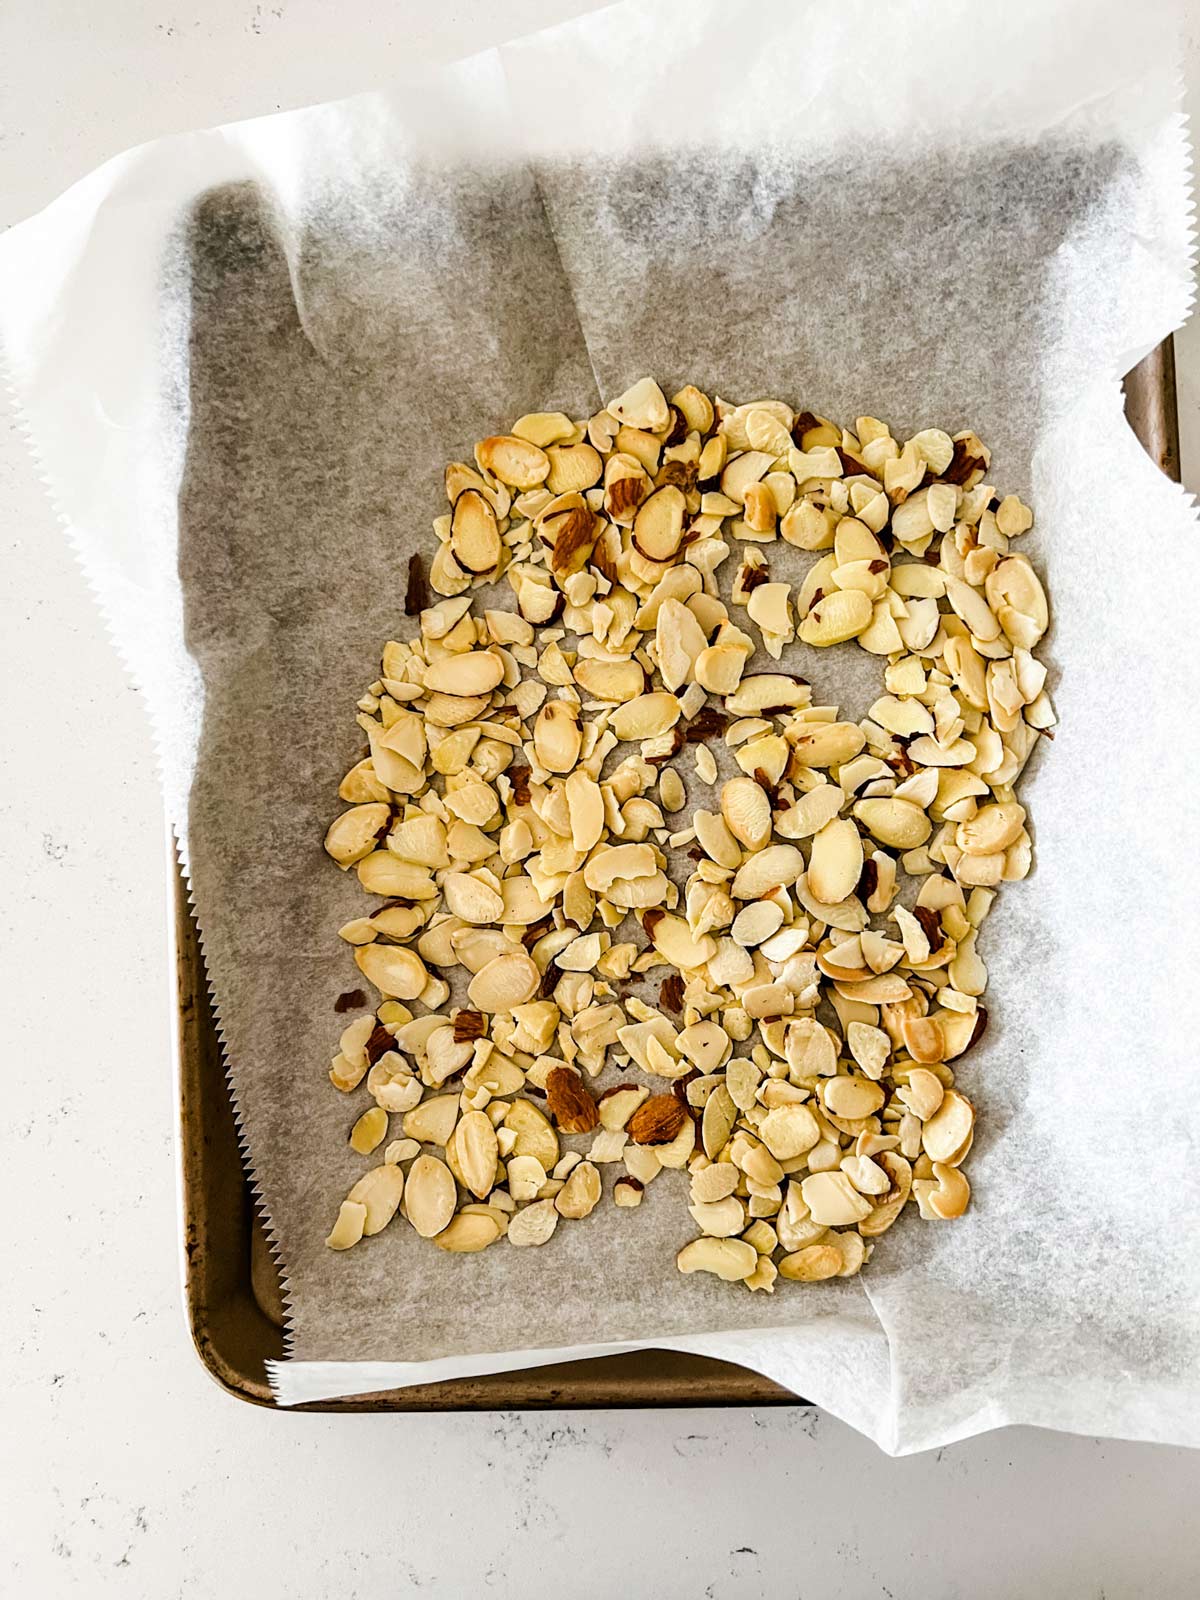 Toasted almonds on a sheet pan.